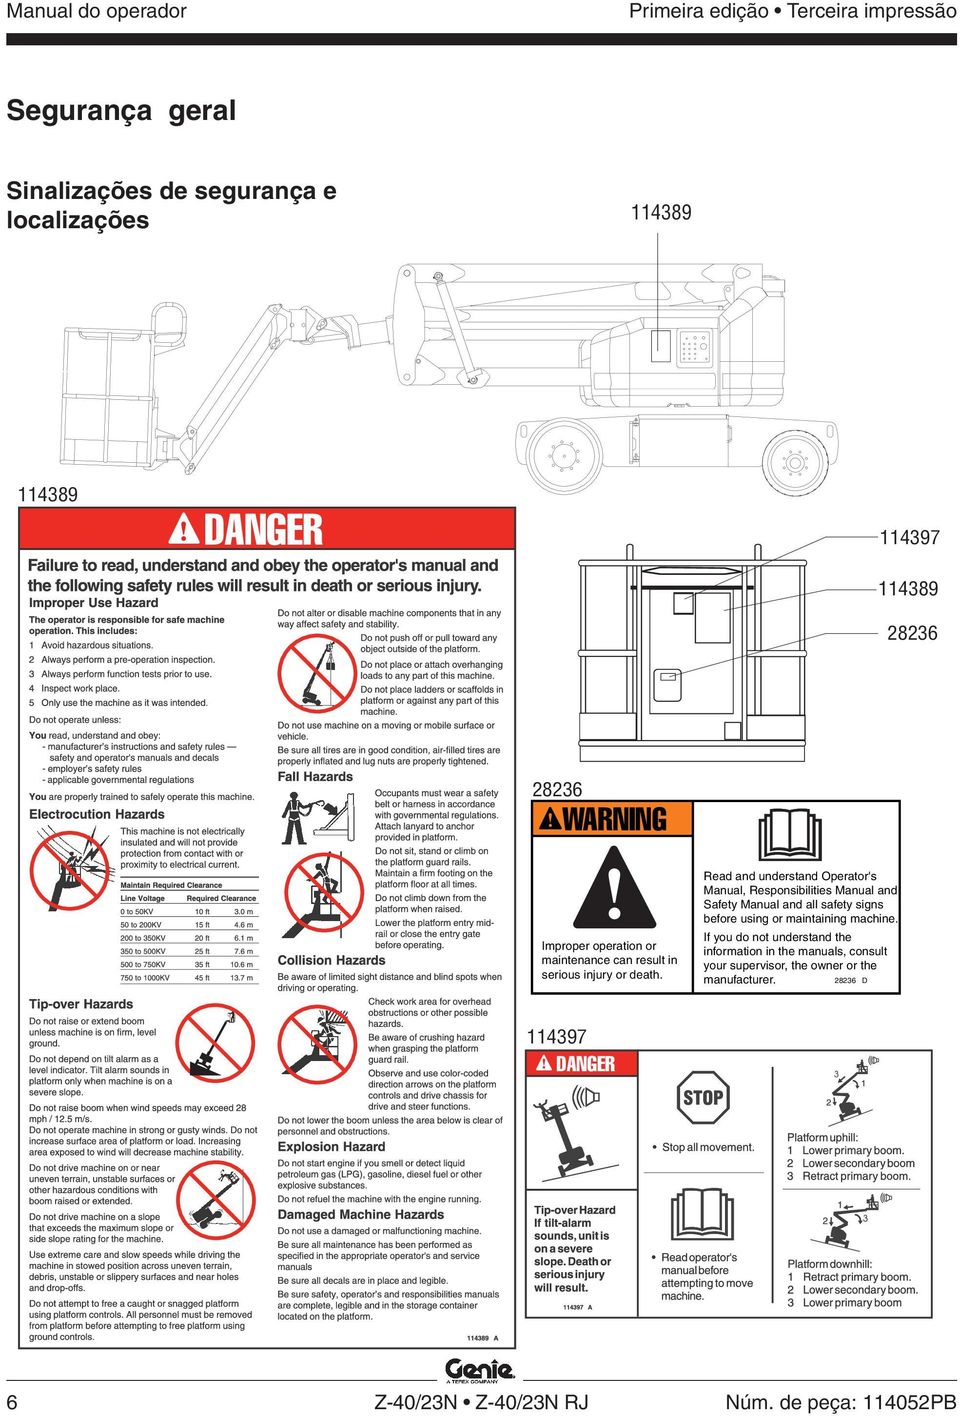 Read and understand Operator's Manual, Responsibilities Manual and Safety Manual and all safety signs before using or maintaining machine.